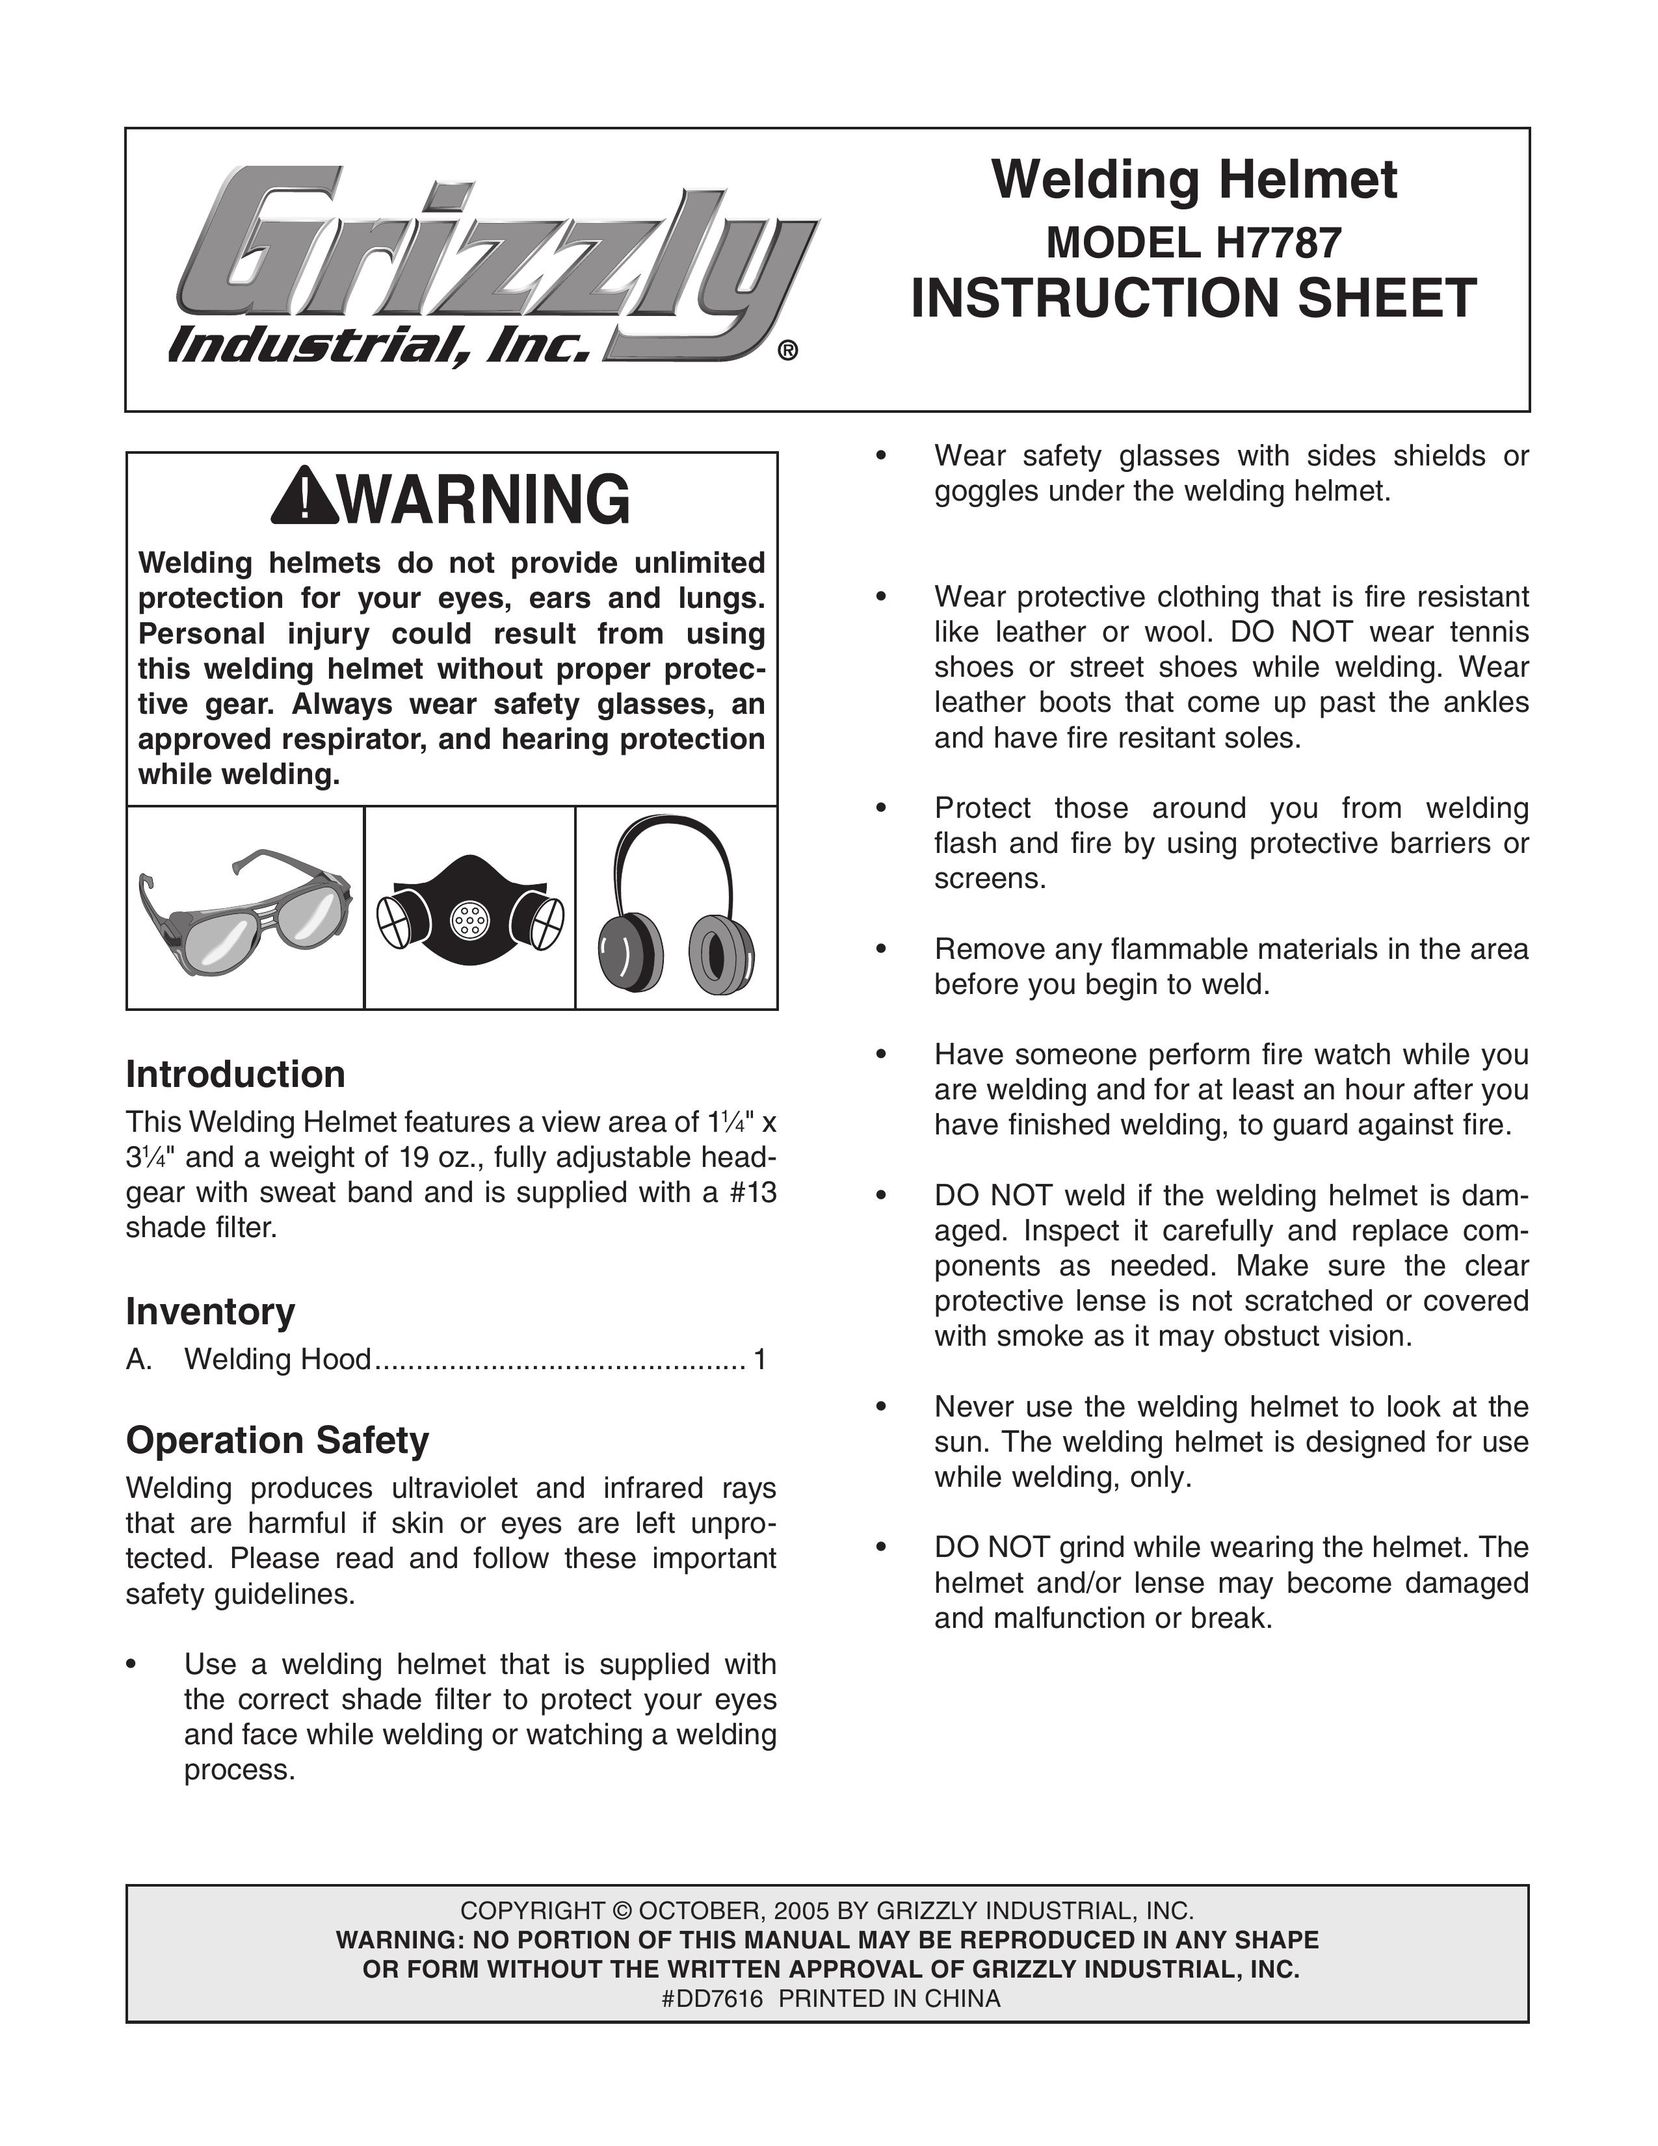 Grizzly h7787 Welding System User Manual